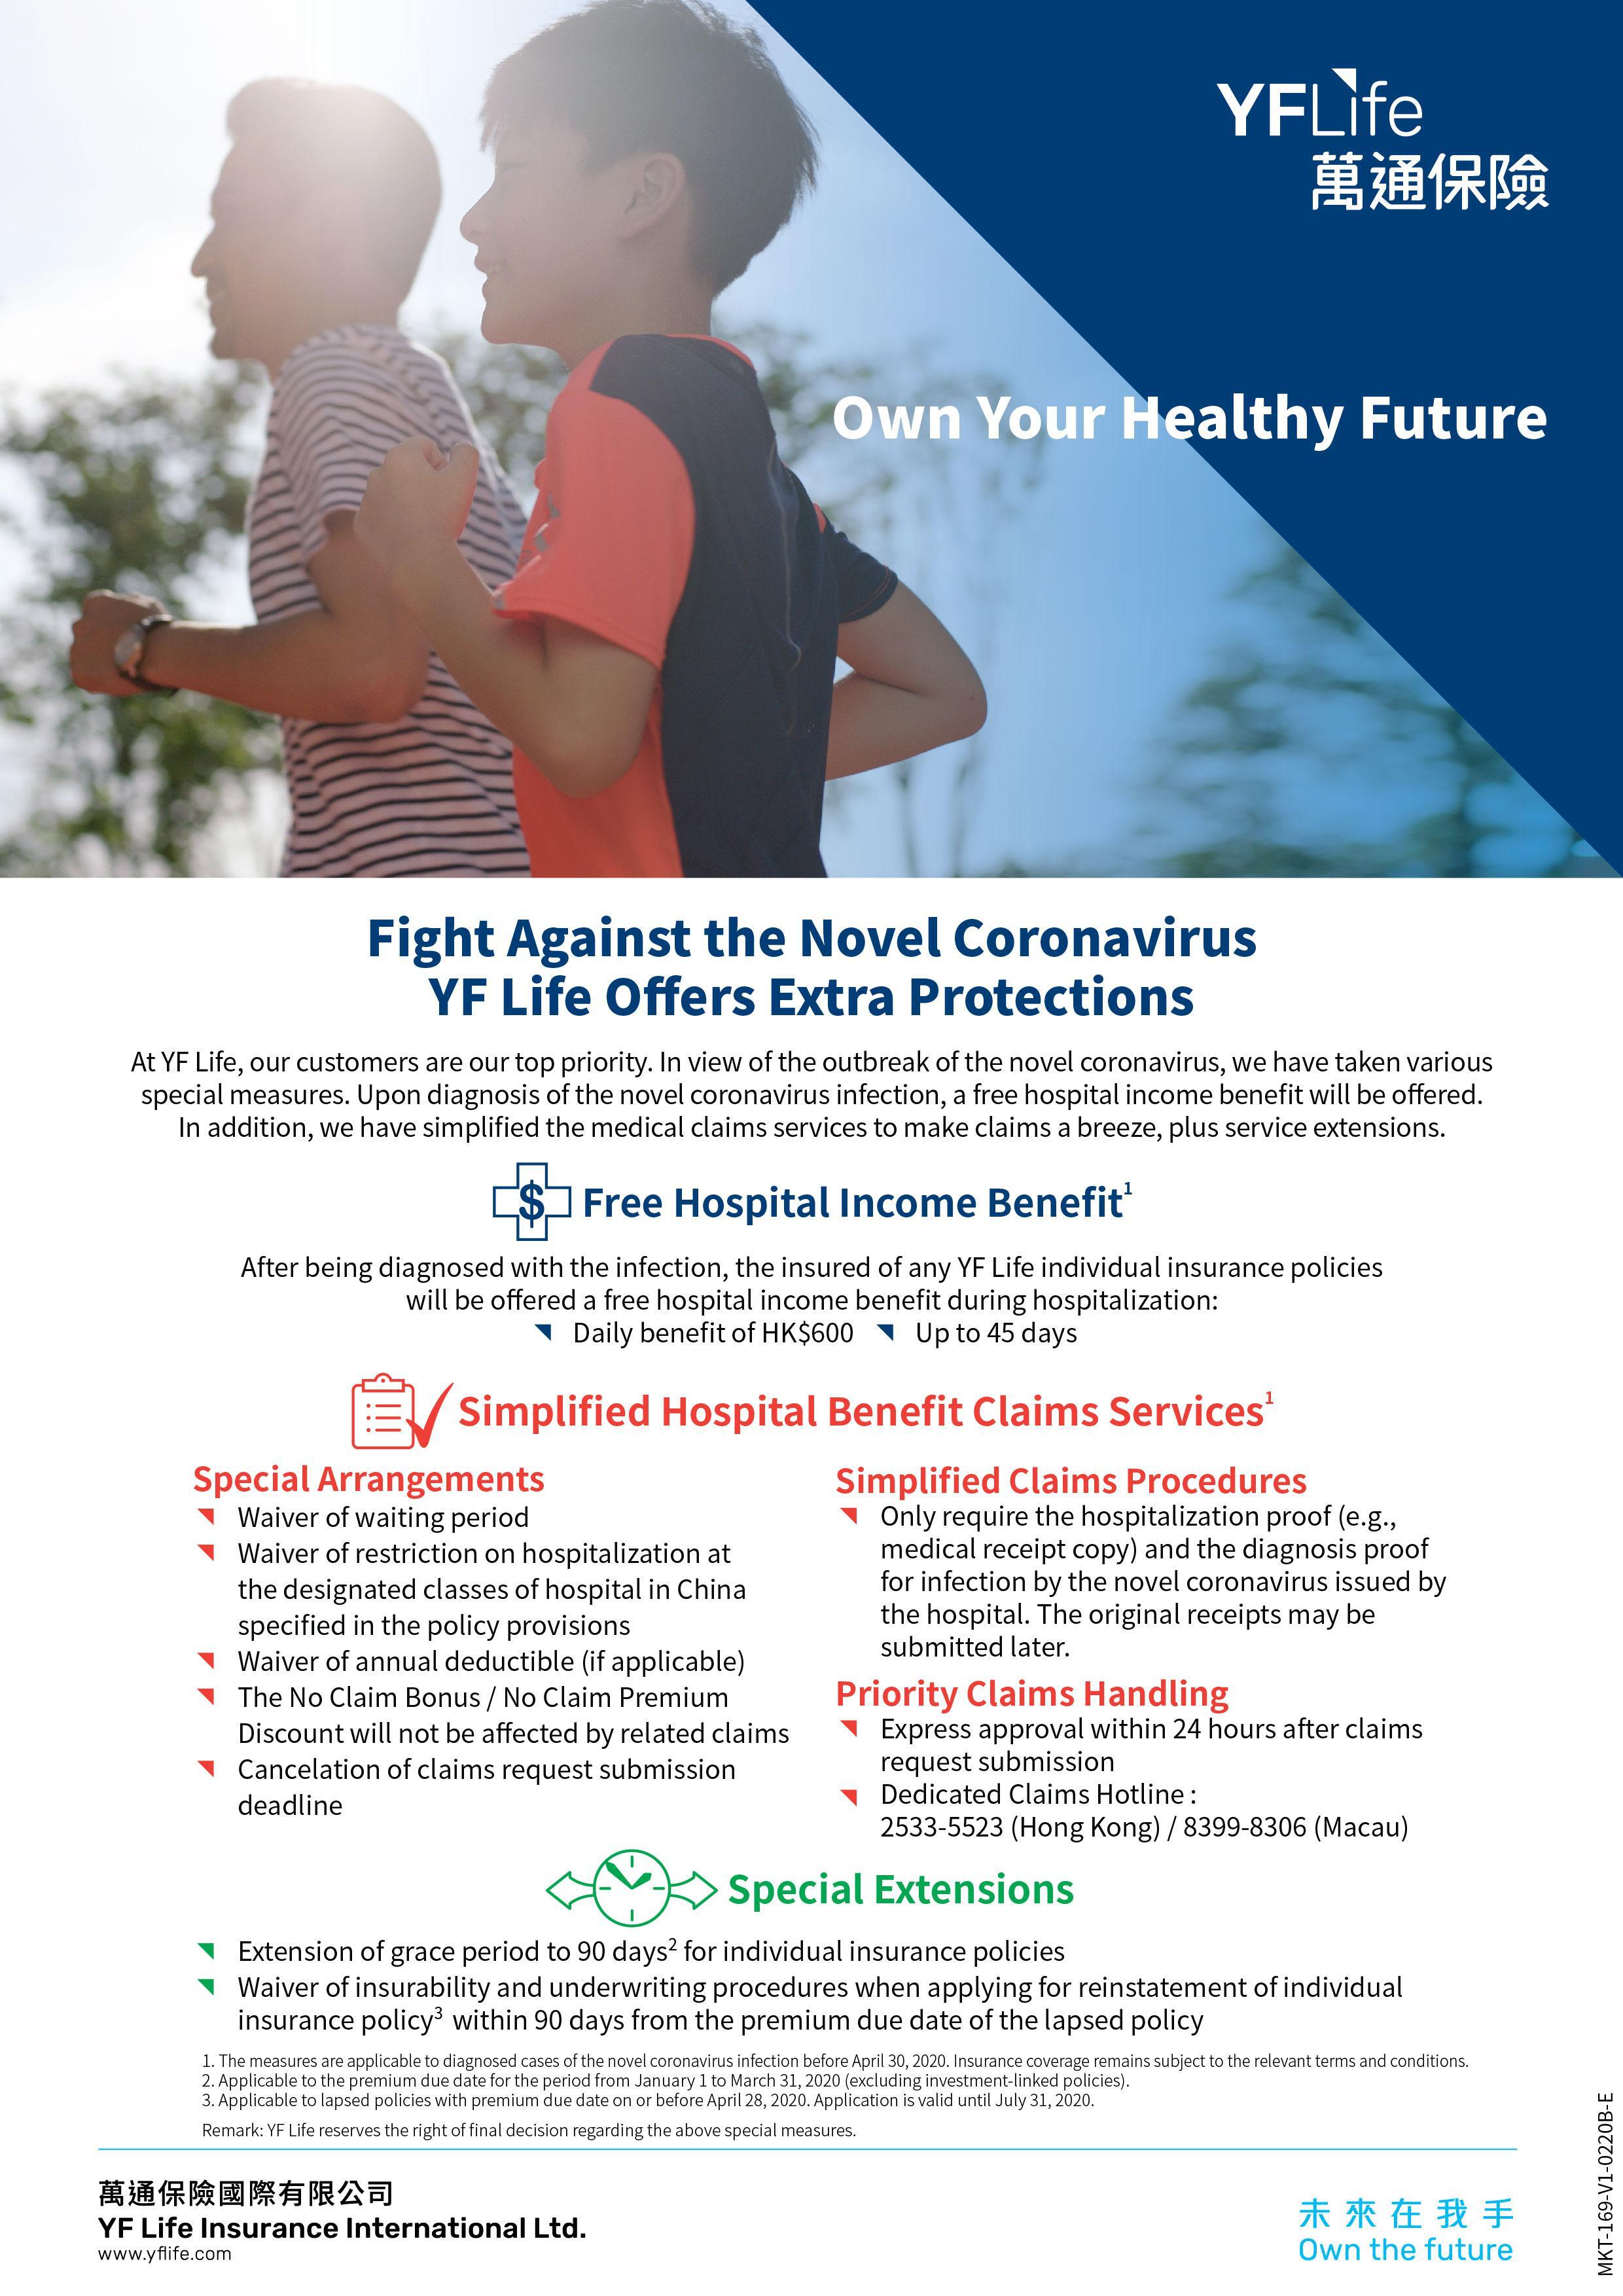 YF Life offers free hospital income benefit and simplified and express hospital benefit claims services for diagnosed cases of the novel coronavirus infection.